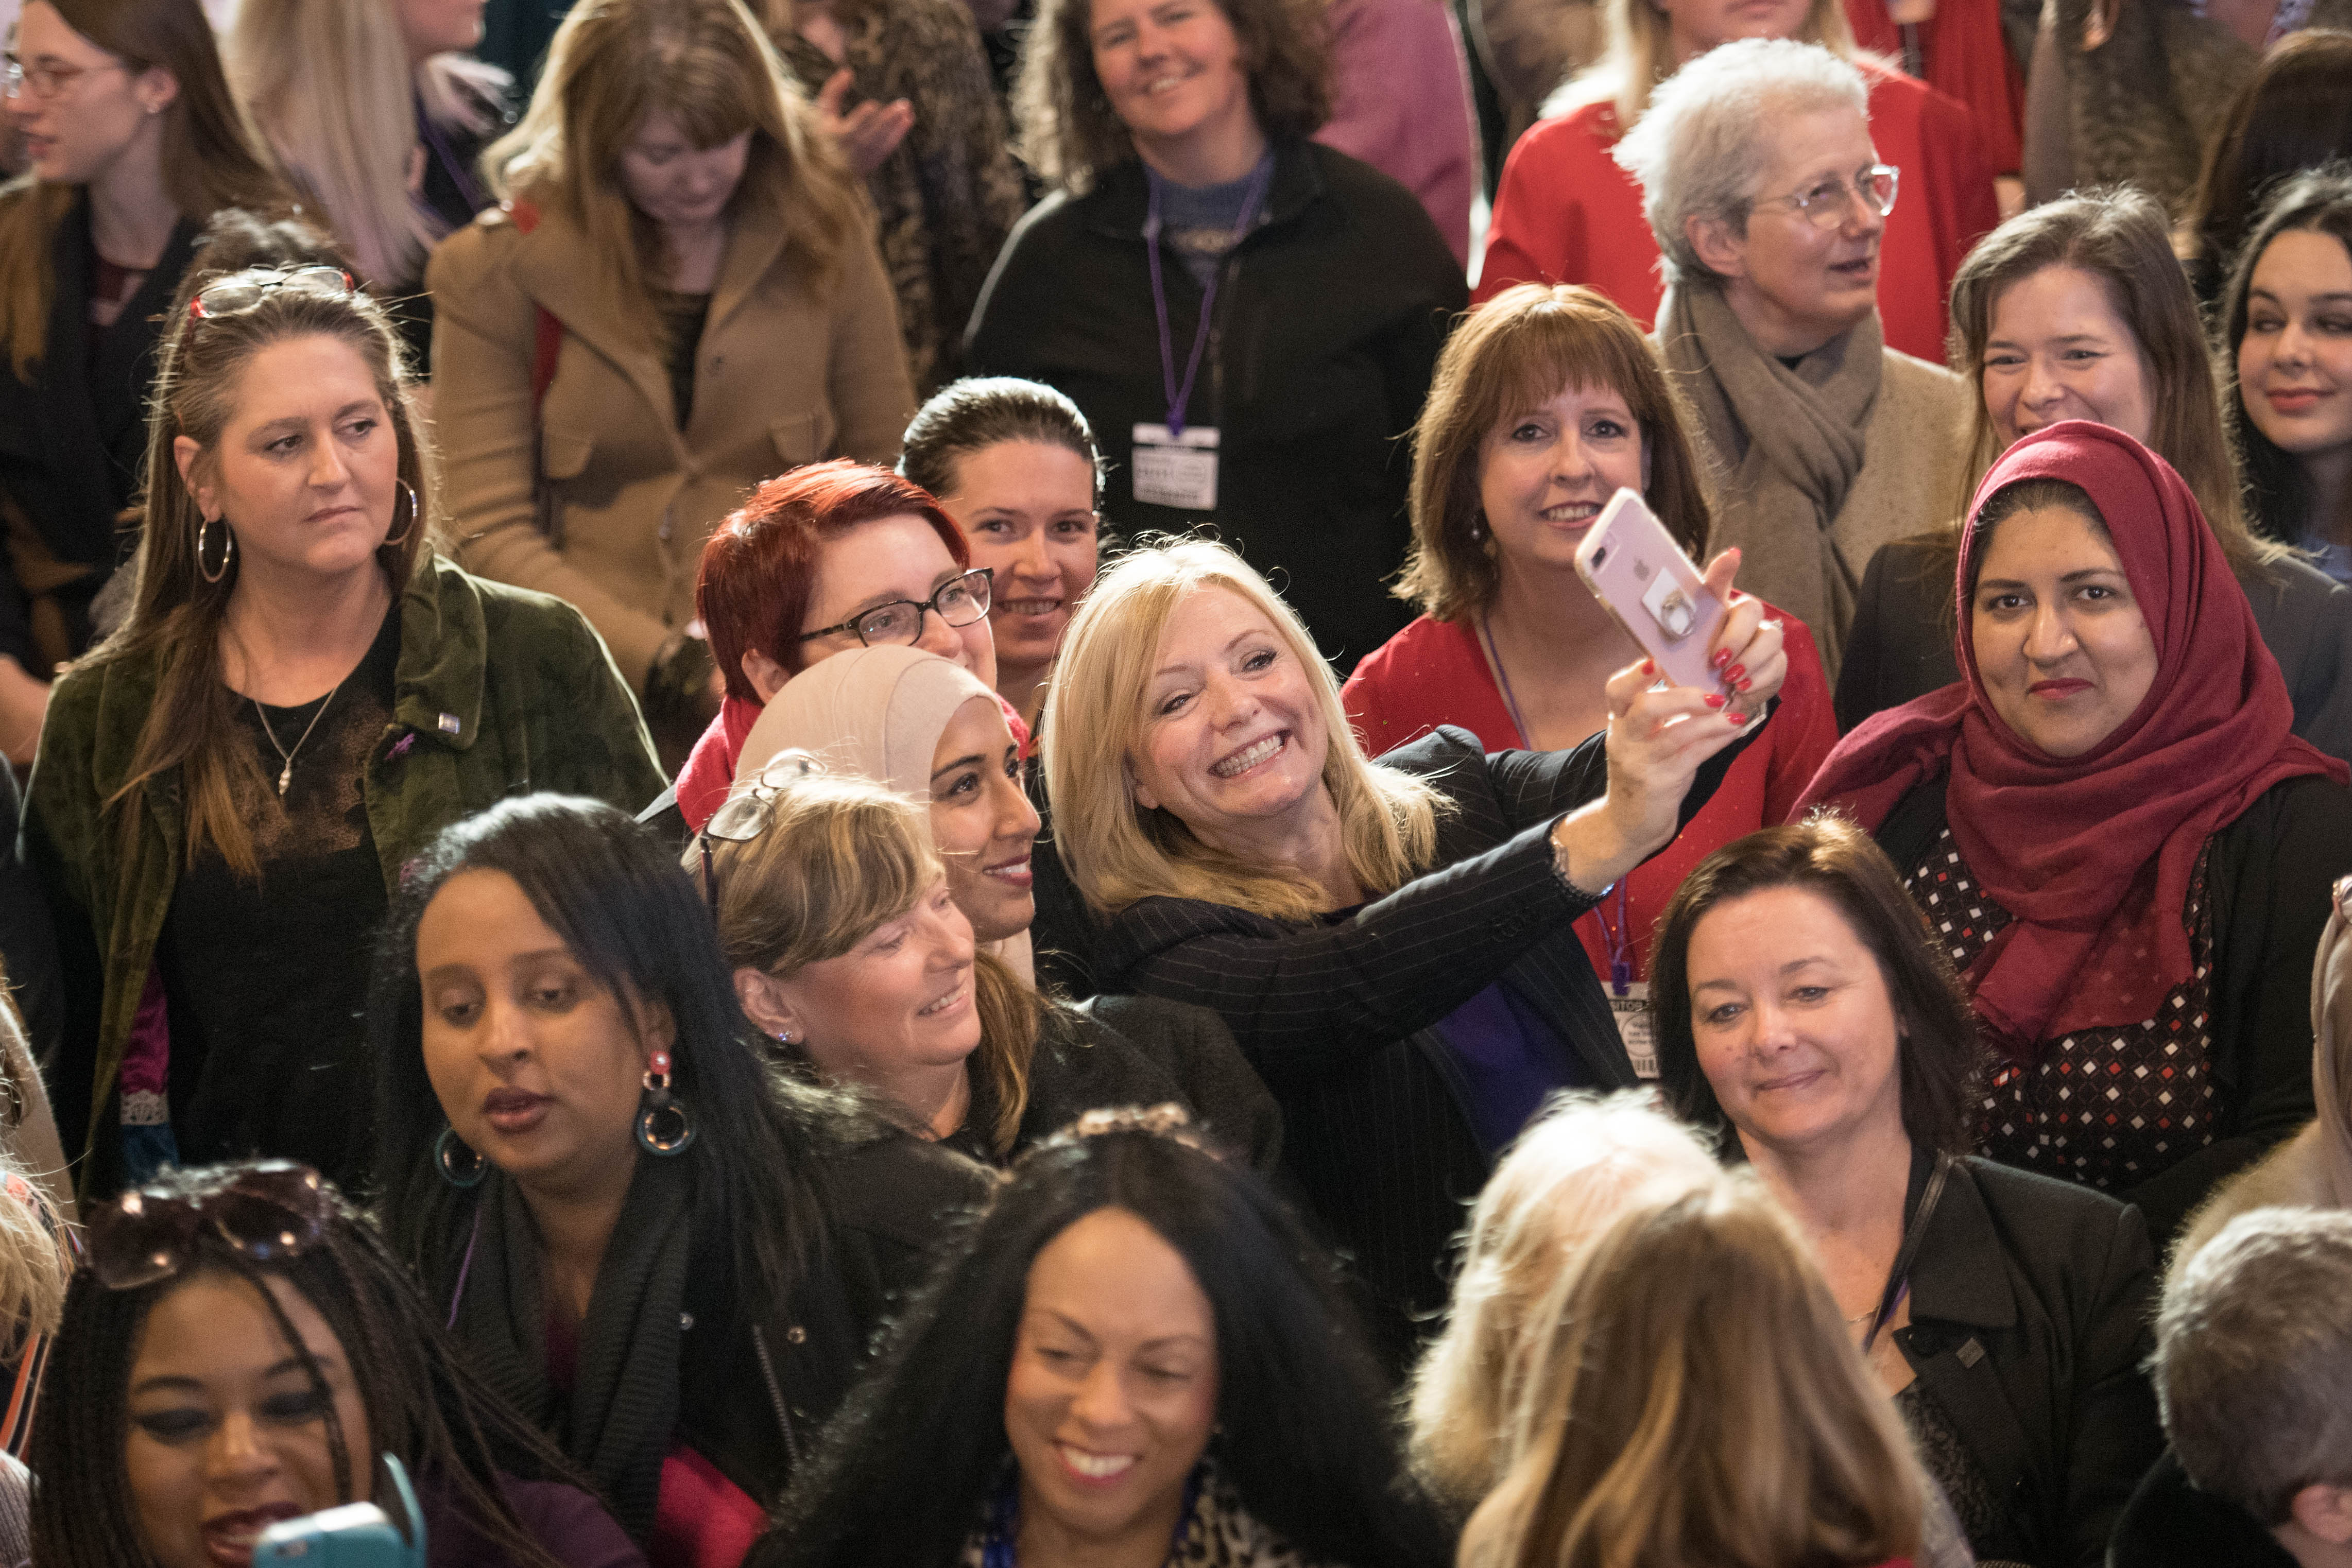 Labour MP Tracy Brabin takes a selfie as MPs from across the political spectrum gather alongside aspiring woman from their constituencies to show them the inner workings of Westminster.